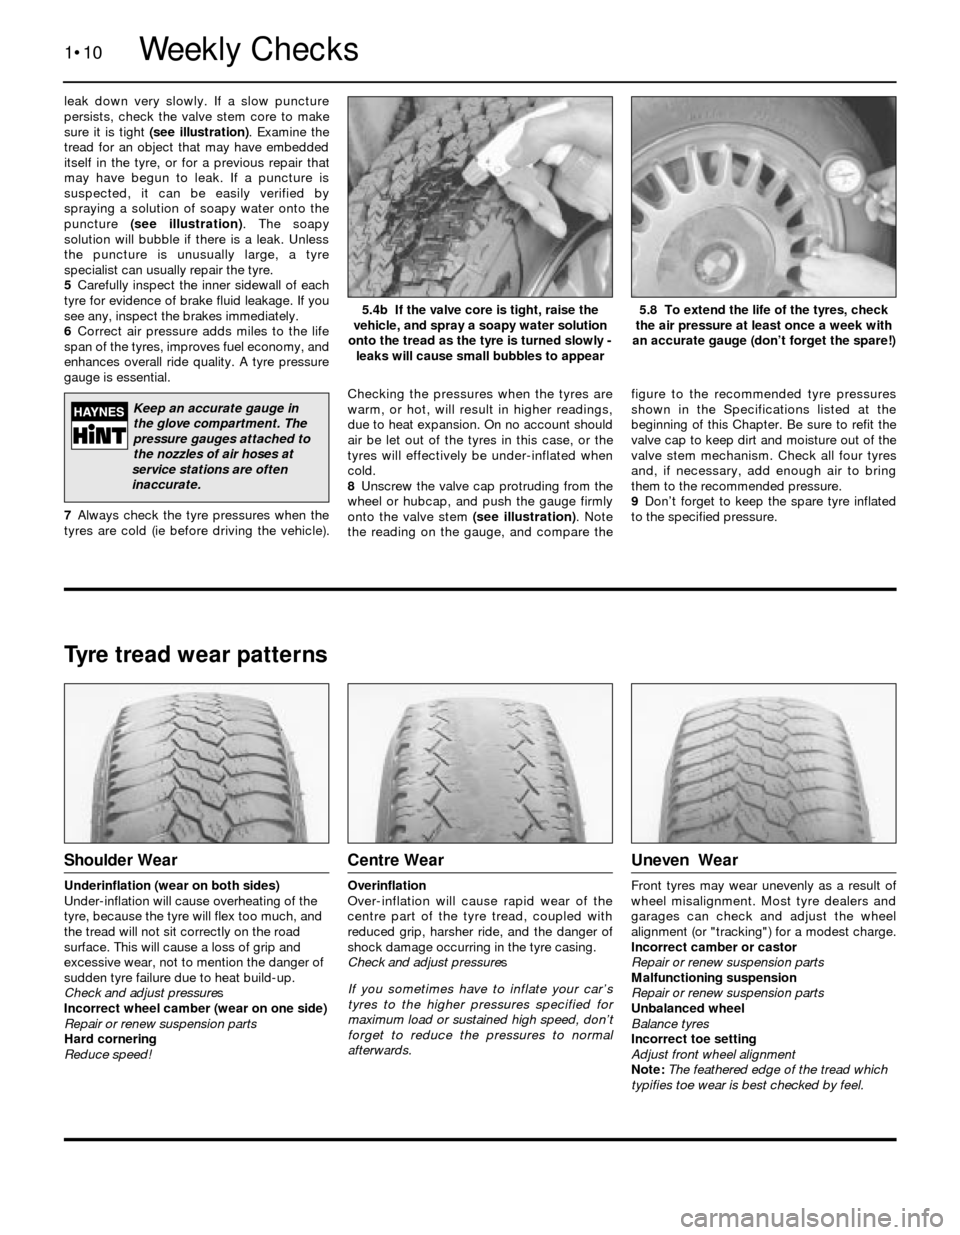 BMW 3 SERIES 1988 E30 User Guide leak down very slowly. If a slow puncture
persists, check the valve stem core to make
sure it is tight (see illustration). Examine the
tread for an object that may have embedded
itself in the tyre, or